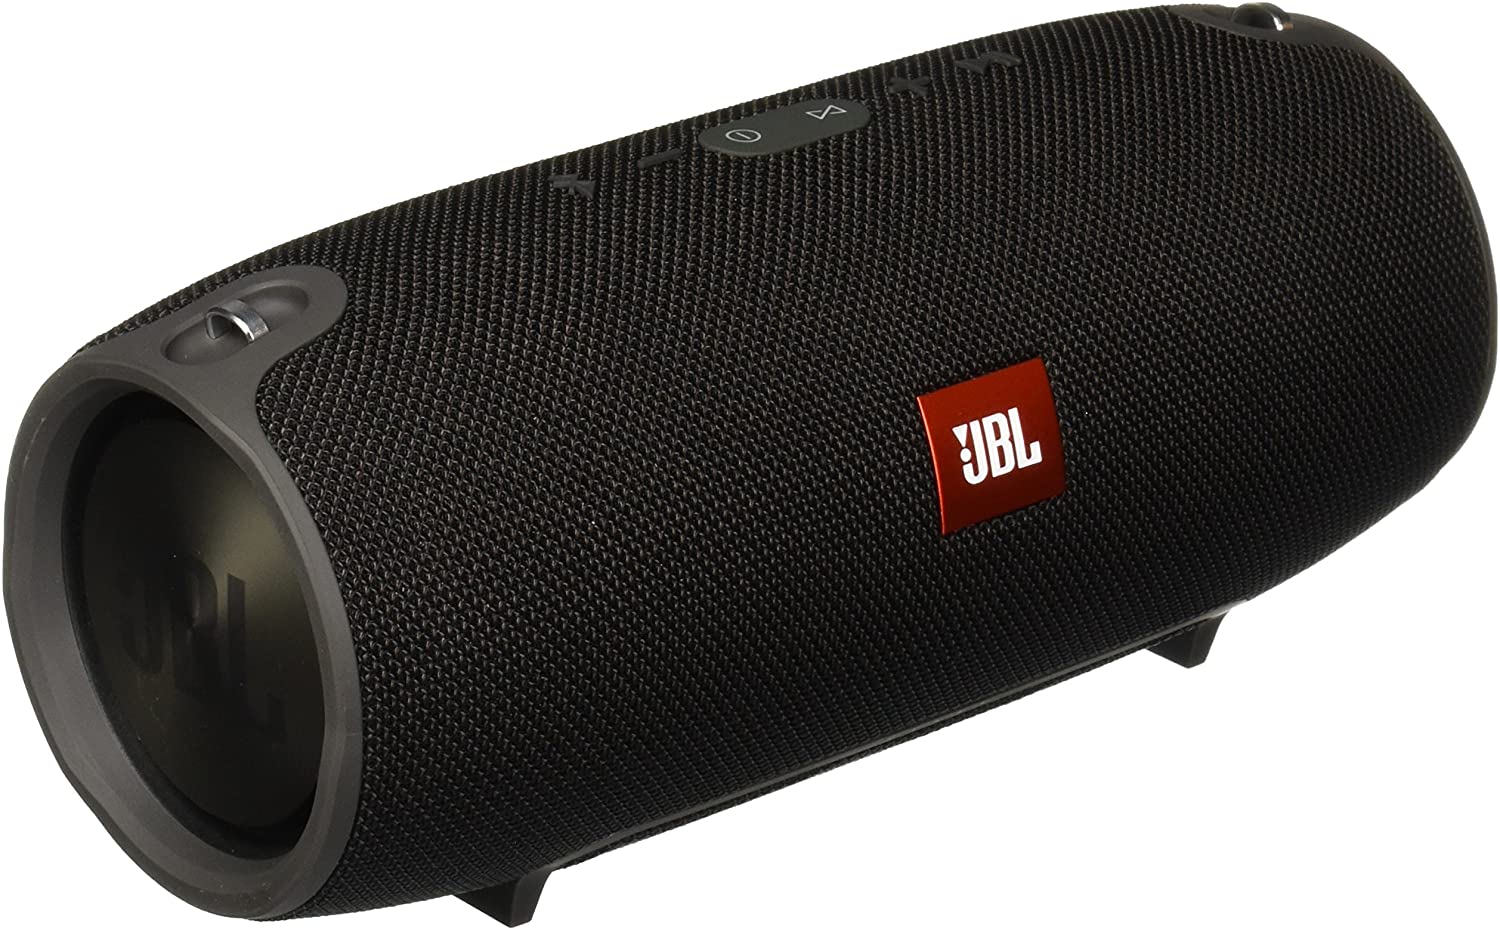 JBL Boombox 12 Inches Waterproof Portable Bluetooth Speaker with Long .